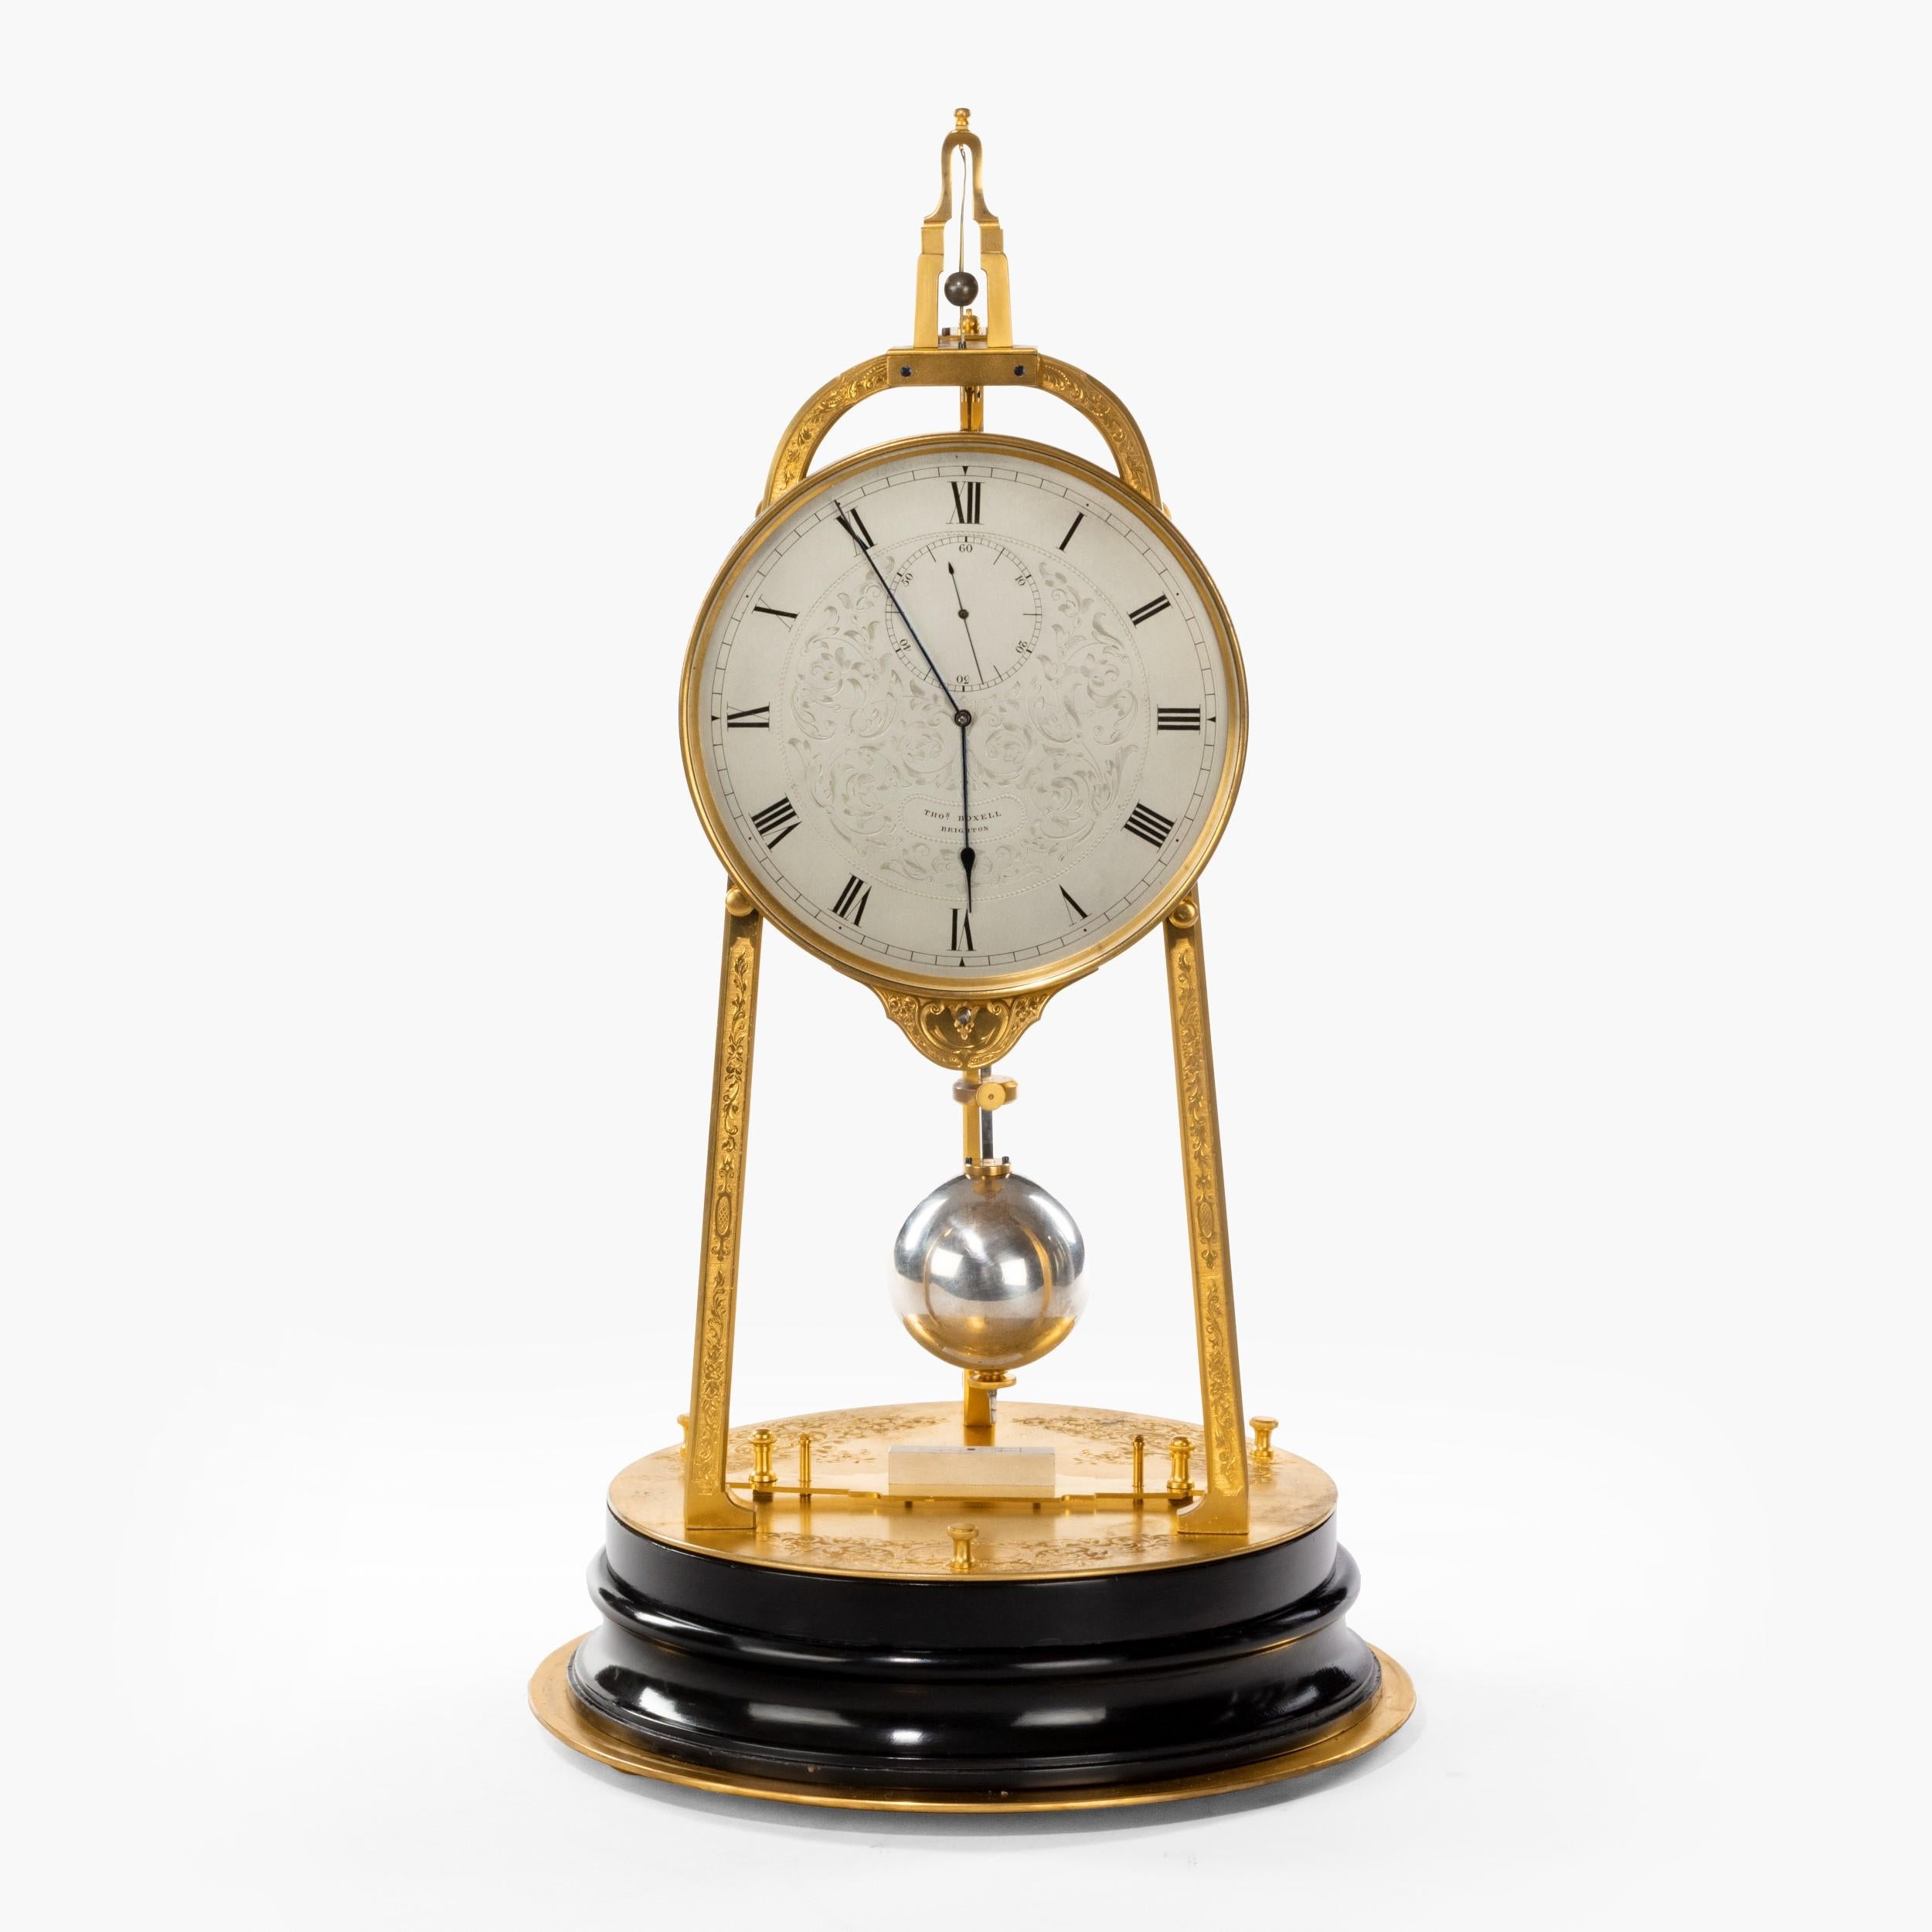 A rare tripod table clock by Thomas Cole
Retailed by Thomas Boxell of Brighton

The circular stepped dark ebonised base surmounted with a gilded panel having engraved foliate panels and three levelling screws, supporting three equidistantly